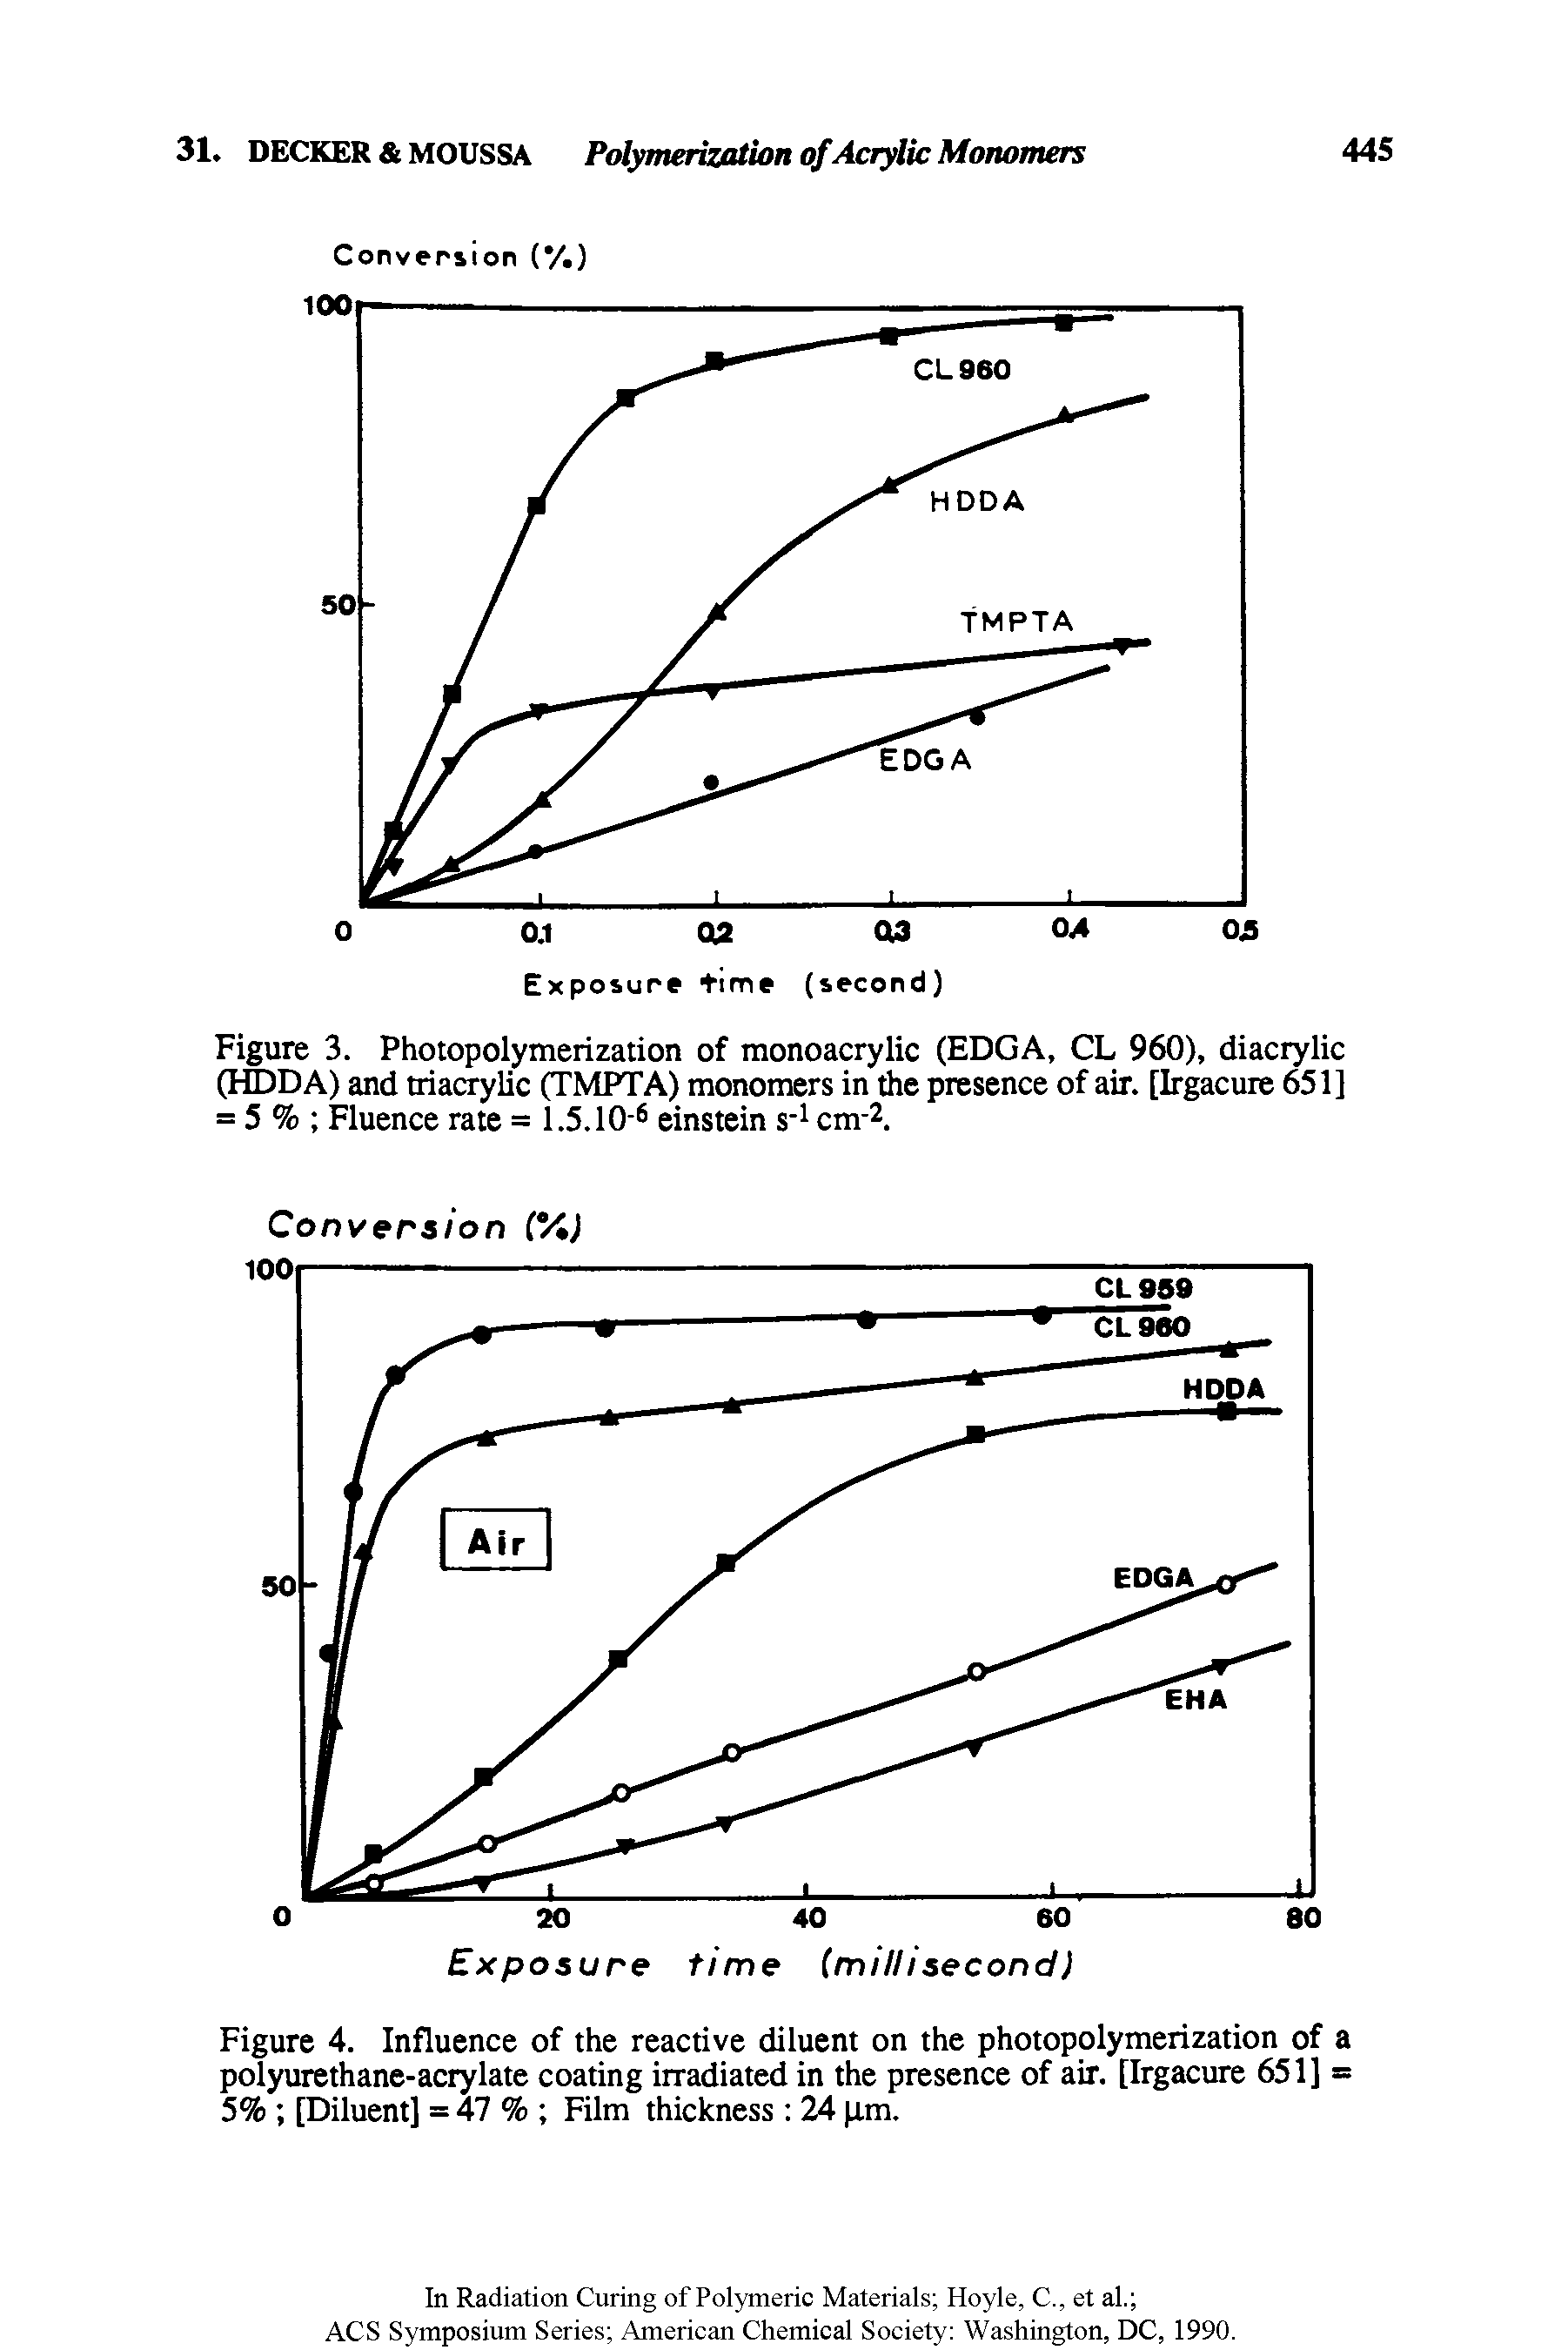 Figure 4. Influence of the reactive diluent on the photopolymerization of a polyurethane-acrylate coating irradiated in the presence of air. [Irgacure 651] = 5% [Diluent] = 47 % Film thickness 24 pm.